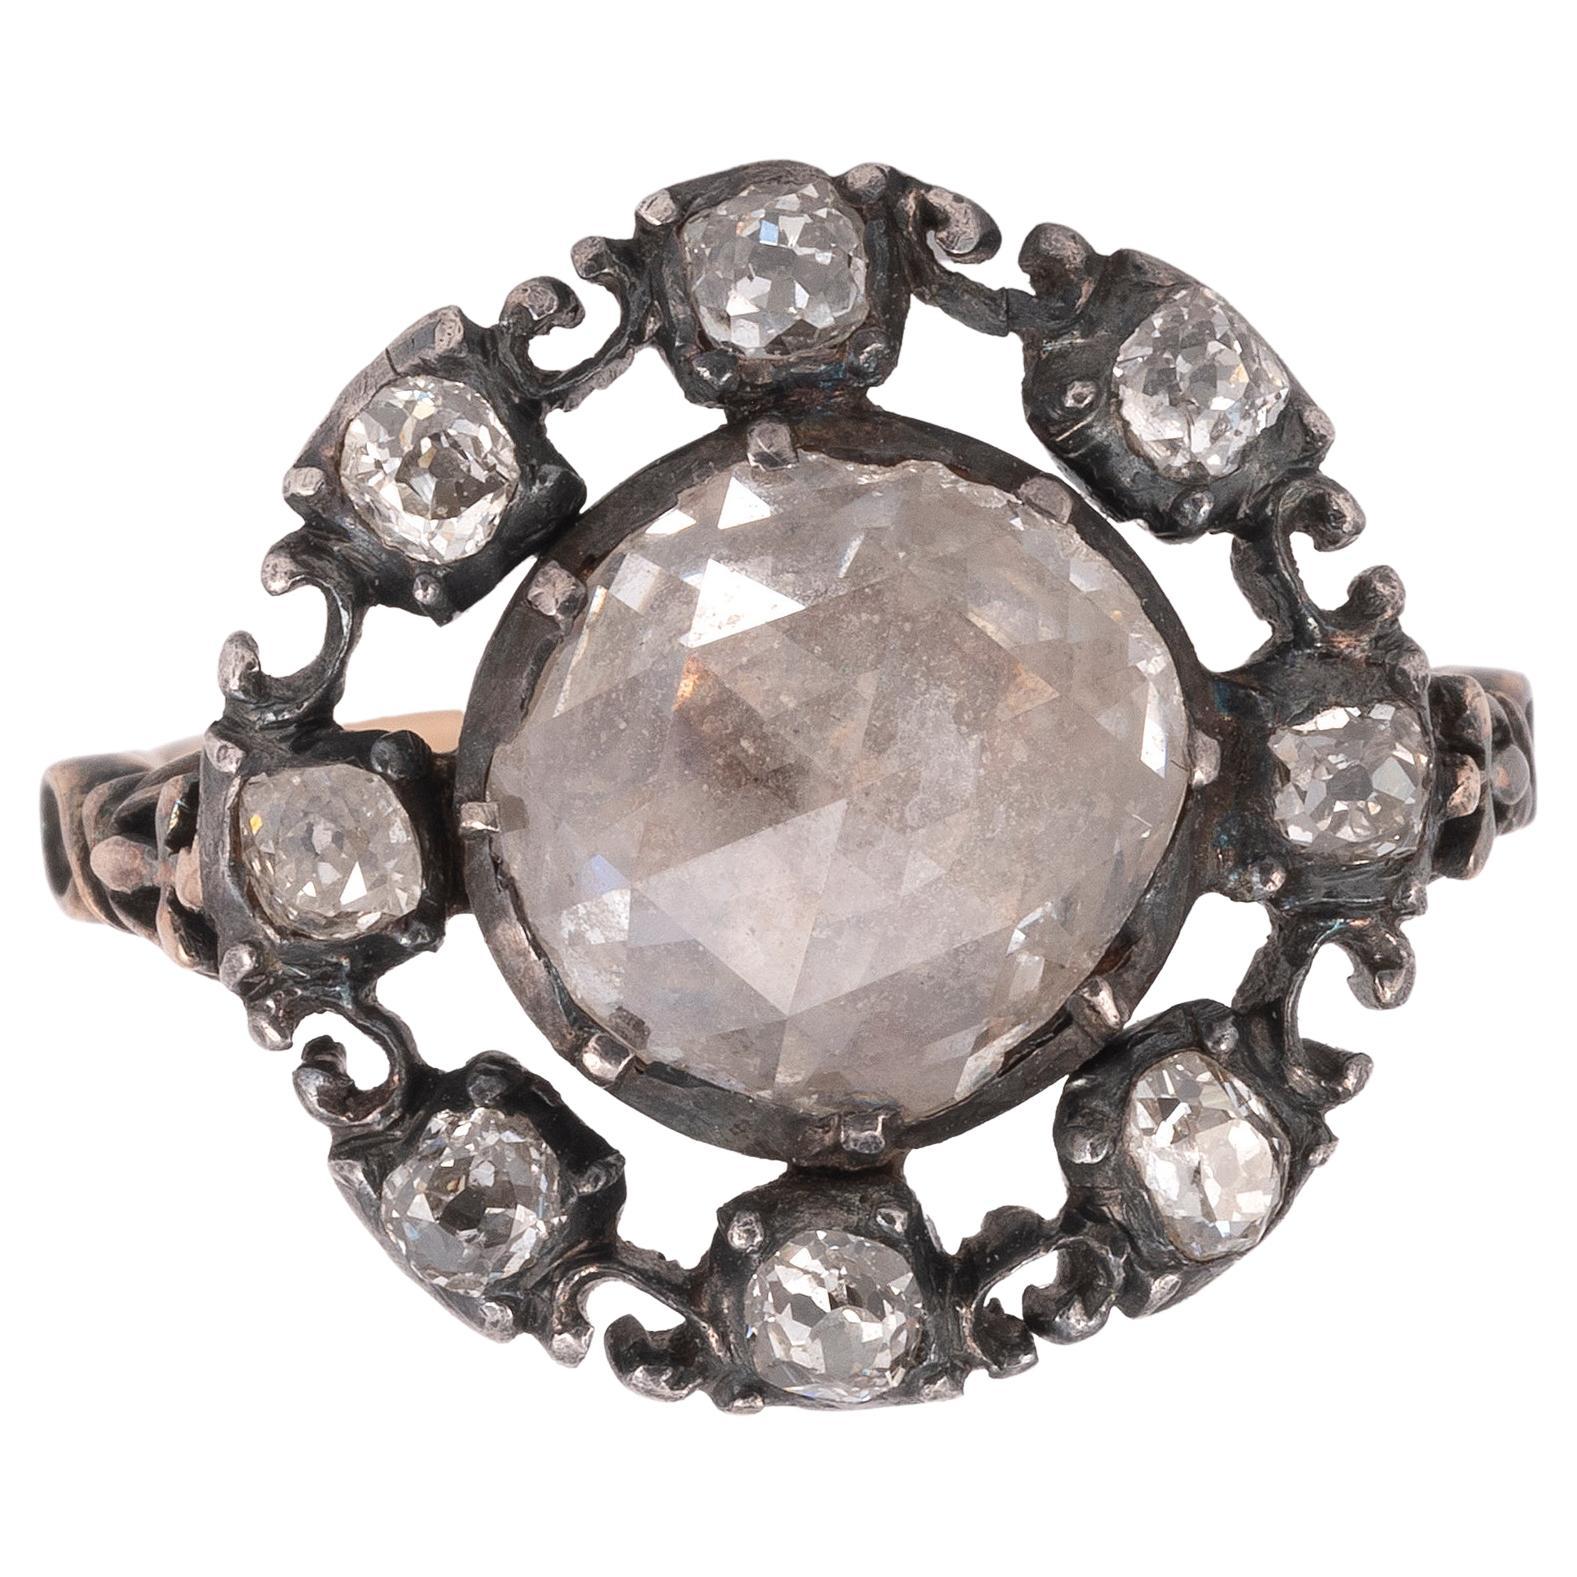 George III Diamond Ring Late 18th Century Of Cluster Design With Foiled-backed